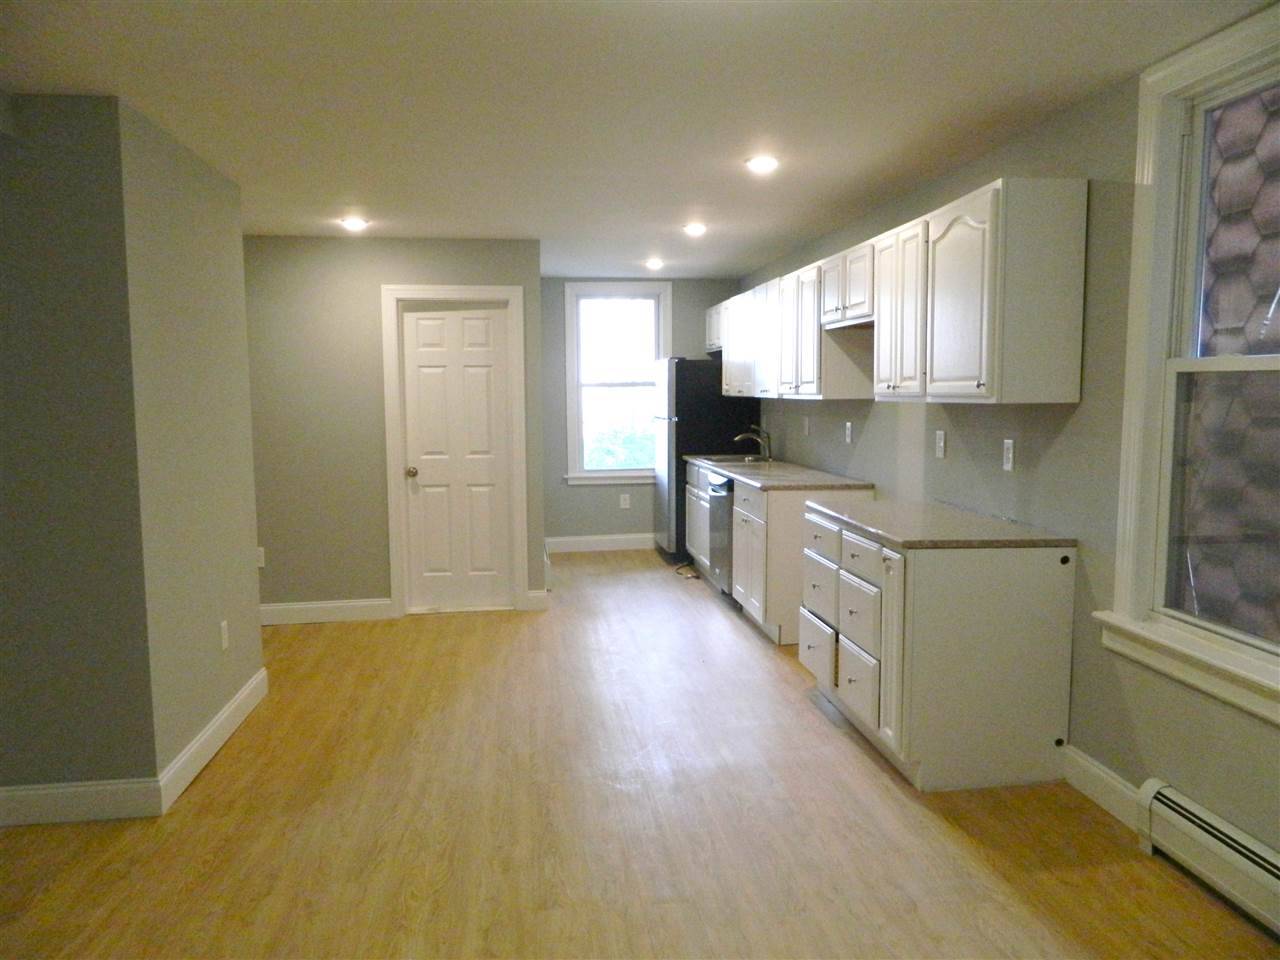 Fully Renovated 4 bed + 2 bath apartment on the 1st floor with almost 2000 s/f